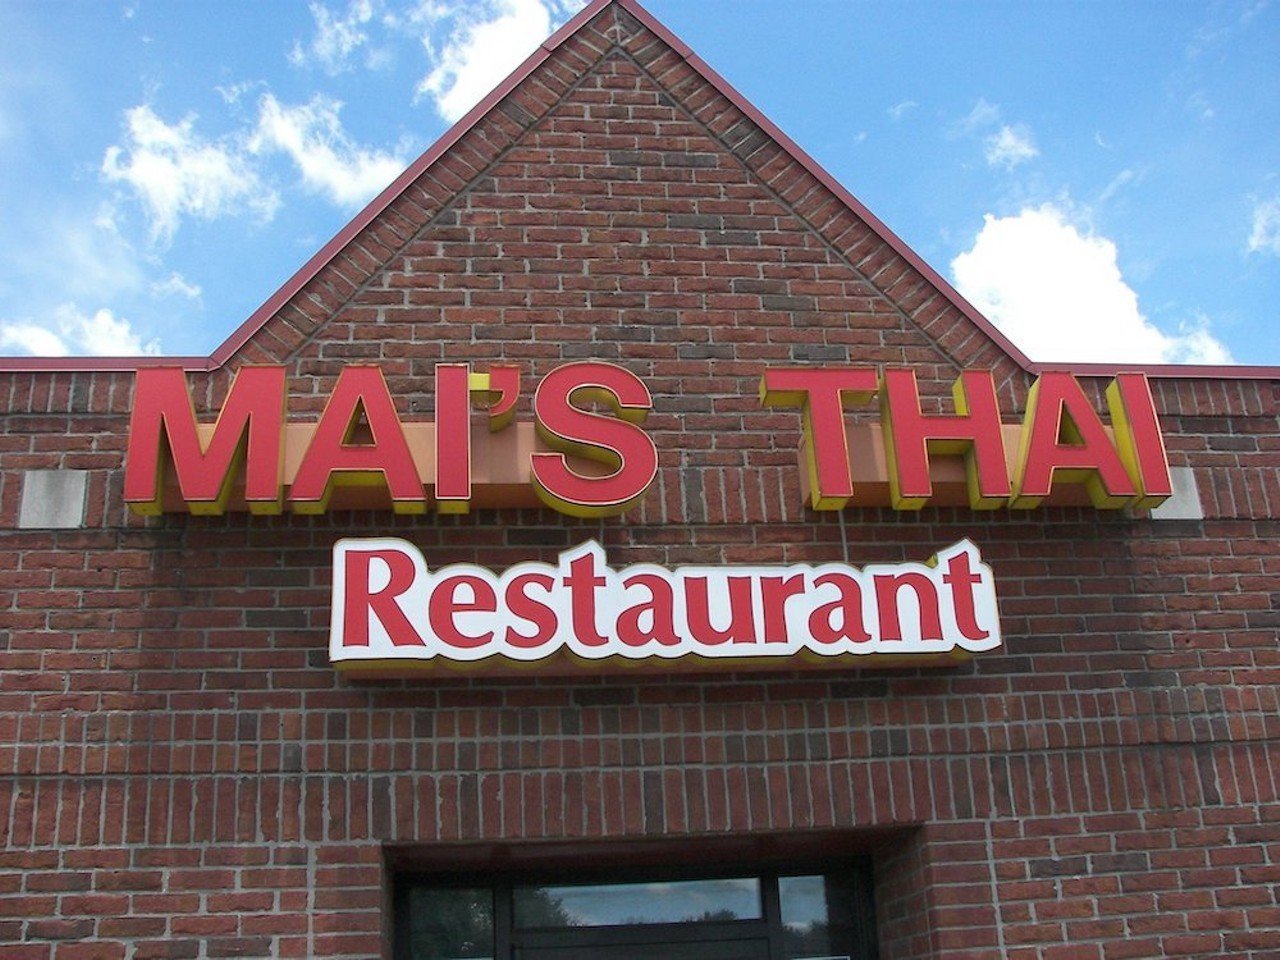 Mai&#146;s Thai
1411 E. 10 St., Jeffersonville, Indiana
Most Louisvillians swear by Simply Thai, but there&#146;s an equally great Thai restaurant across the river in Jeffersonville, started by Mai Kungkran (now Meyers), who learned traditional &#147;home style&#148; Thai cooking from her father while living in a suburb of Bangkok. You&#146;ll eat your pad thai and curry surrounded by scenes of Thailand, making you feel far away from the H&R Block next door.
Photo via facebook.com/Mais-Thai-Restaurant